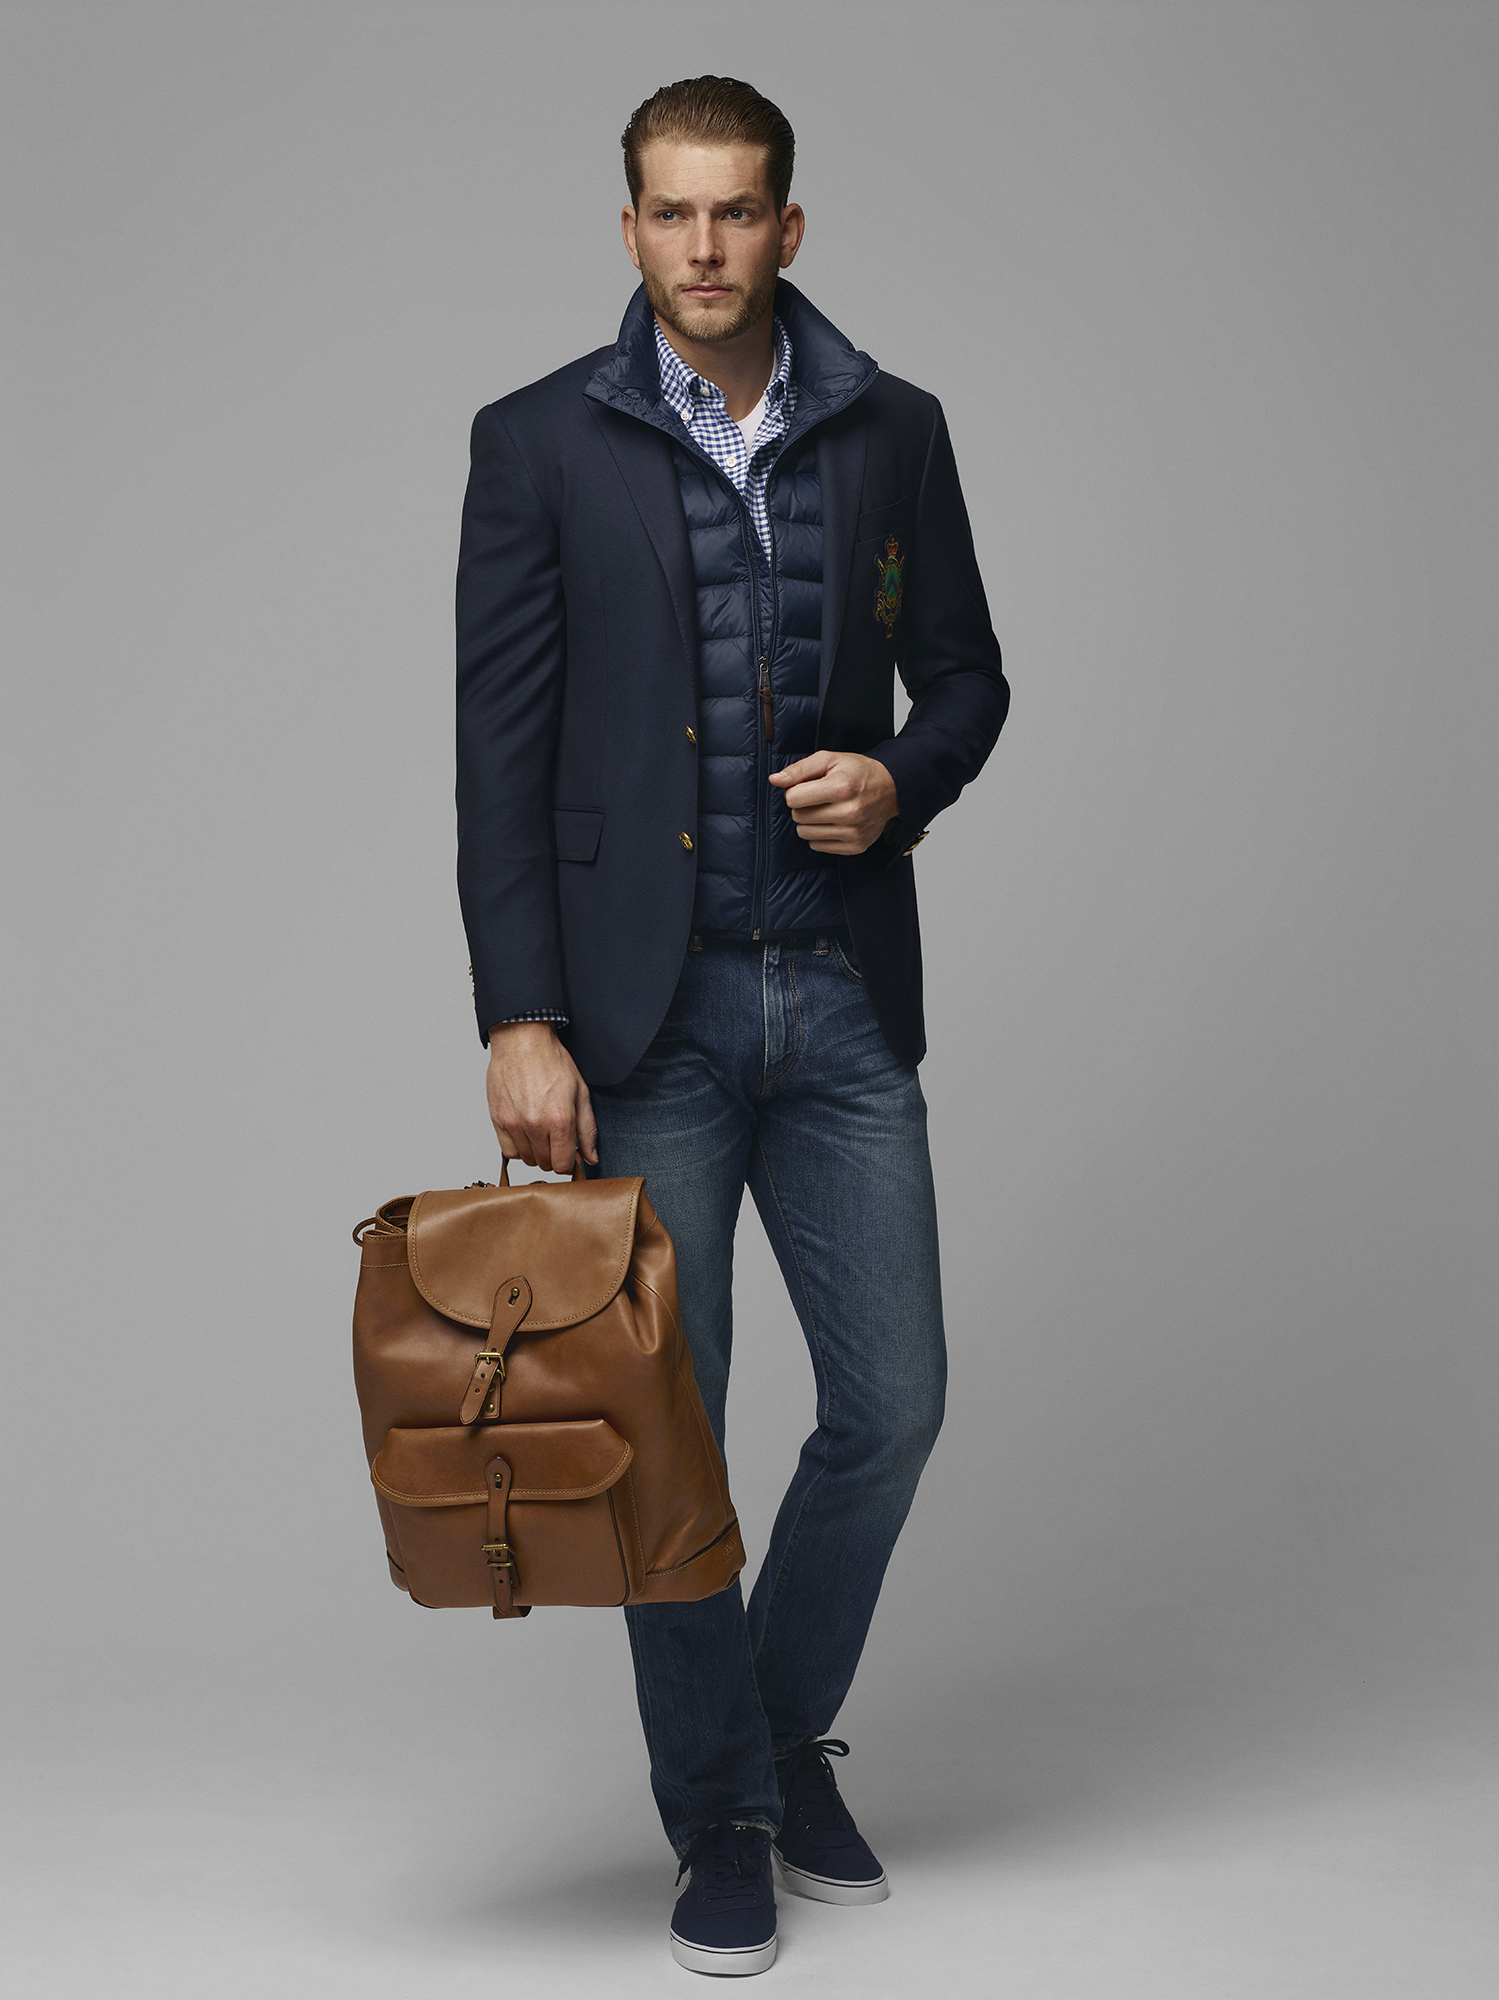 Blazer, £425; quilted gilet, £229; gingham shirt, £85; T-shirt, £55; jeans, £119; trainers, £69; leather backpack, £579